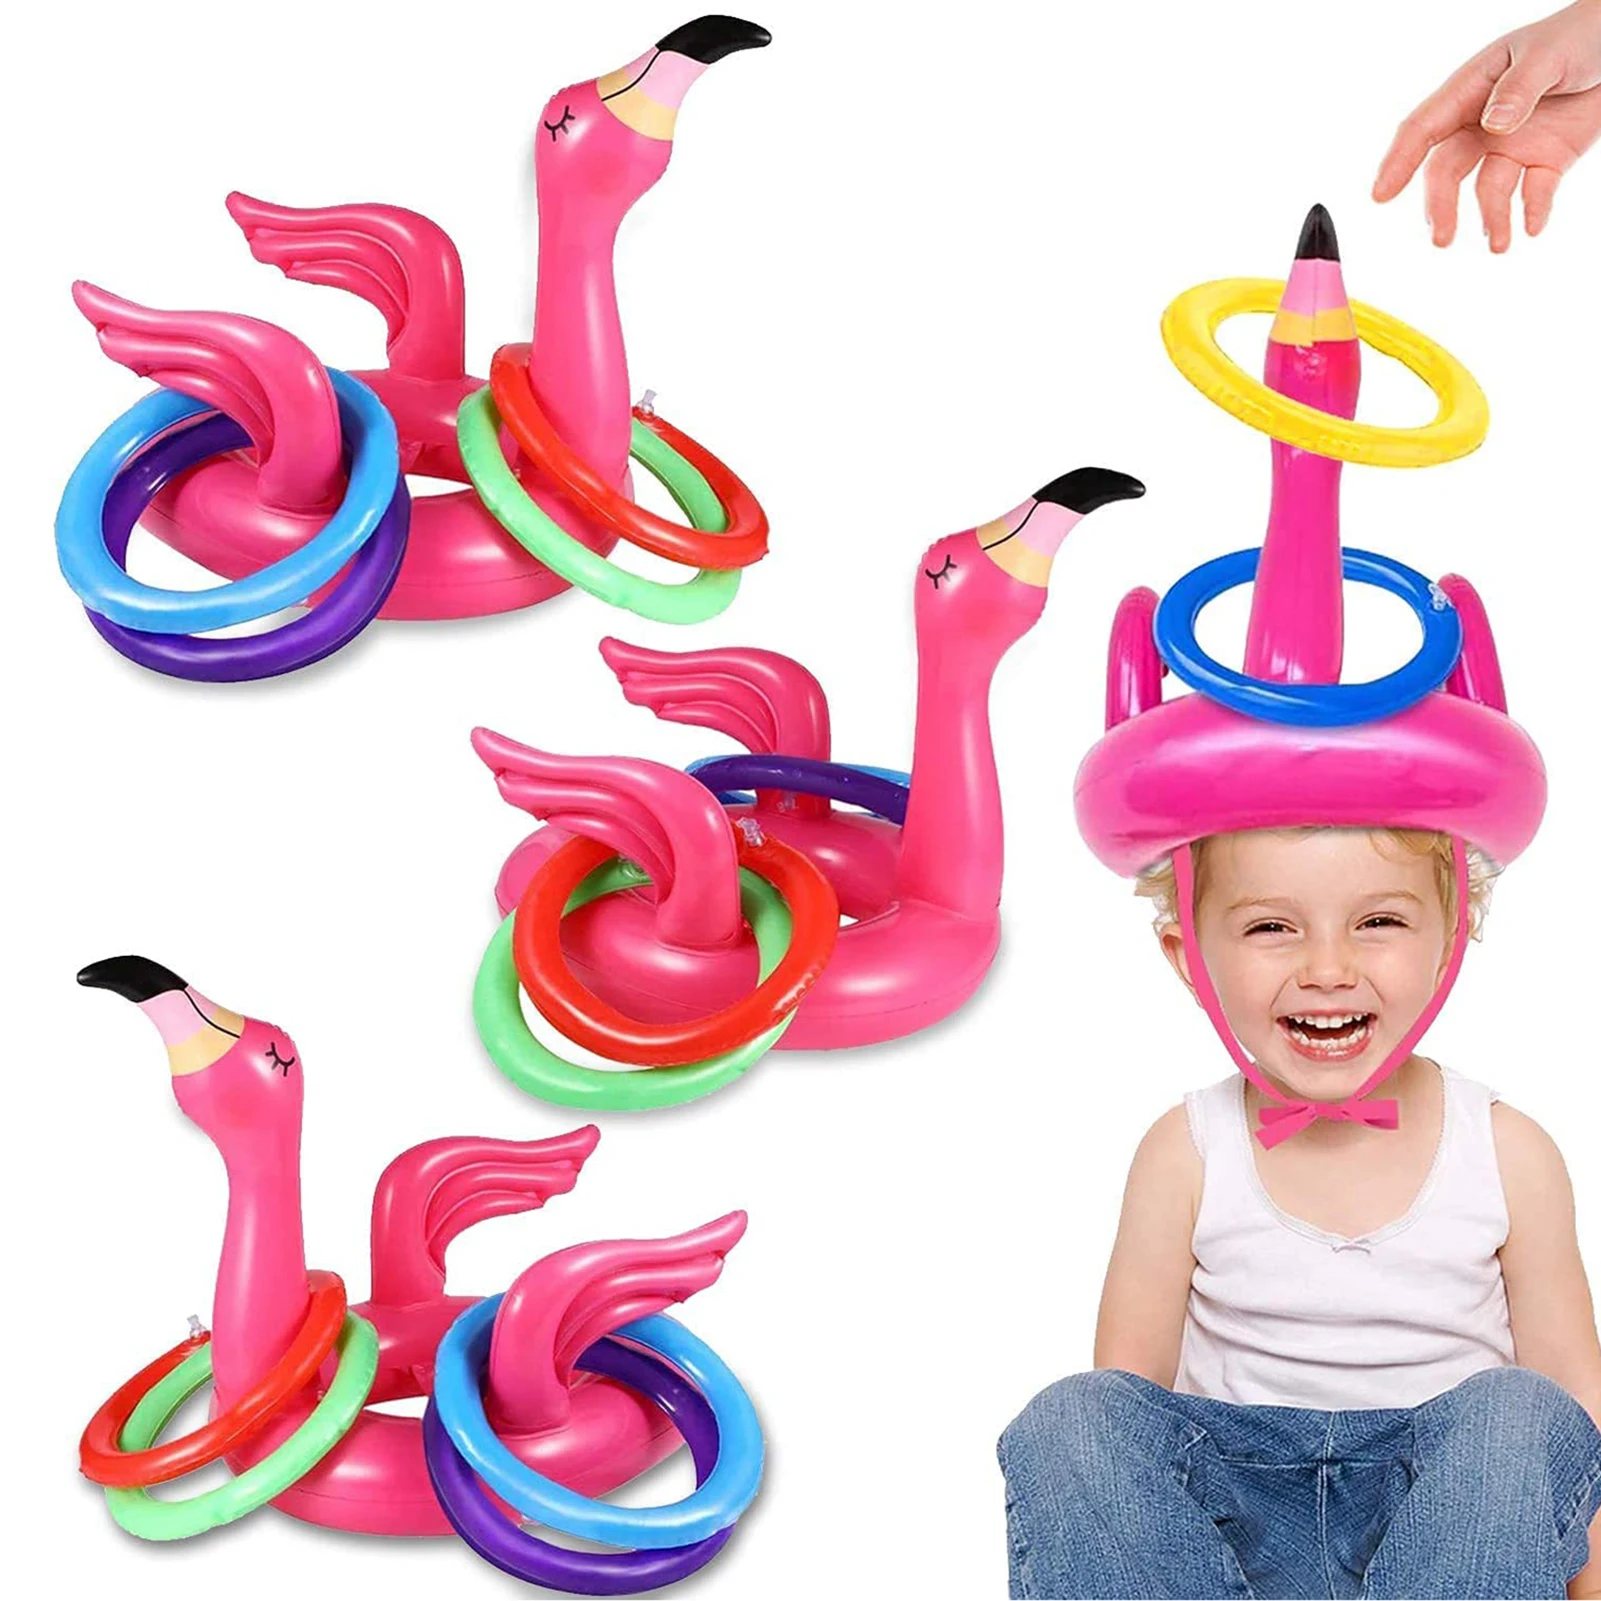 Portable Iatable Flamingo Head Hat With 4Pcs Toss Rings Water Game For Family Party Pink PVC Material Outdoor Pools Fun Toys fade resistant ring toss set fun halloween toy spider ring toss game for kids adults family party activity new year gift